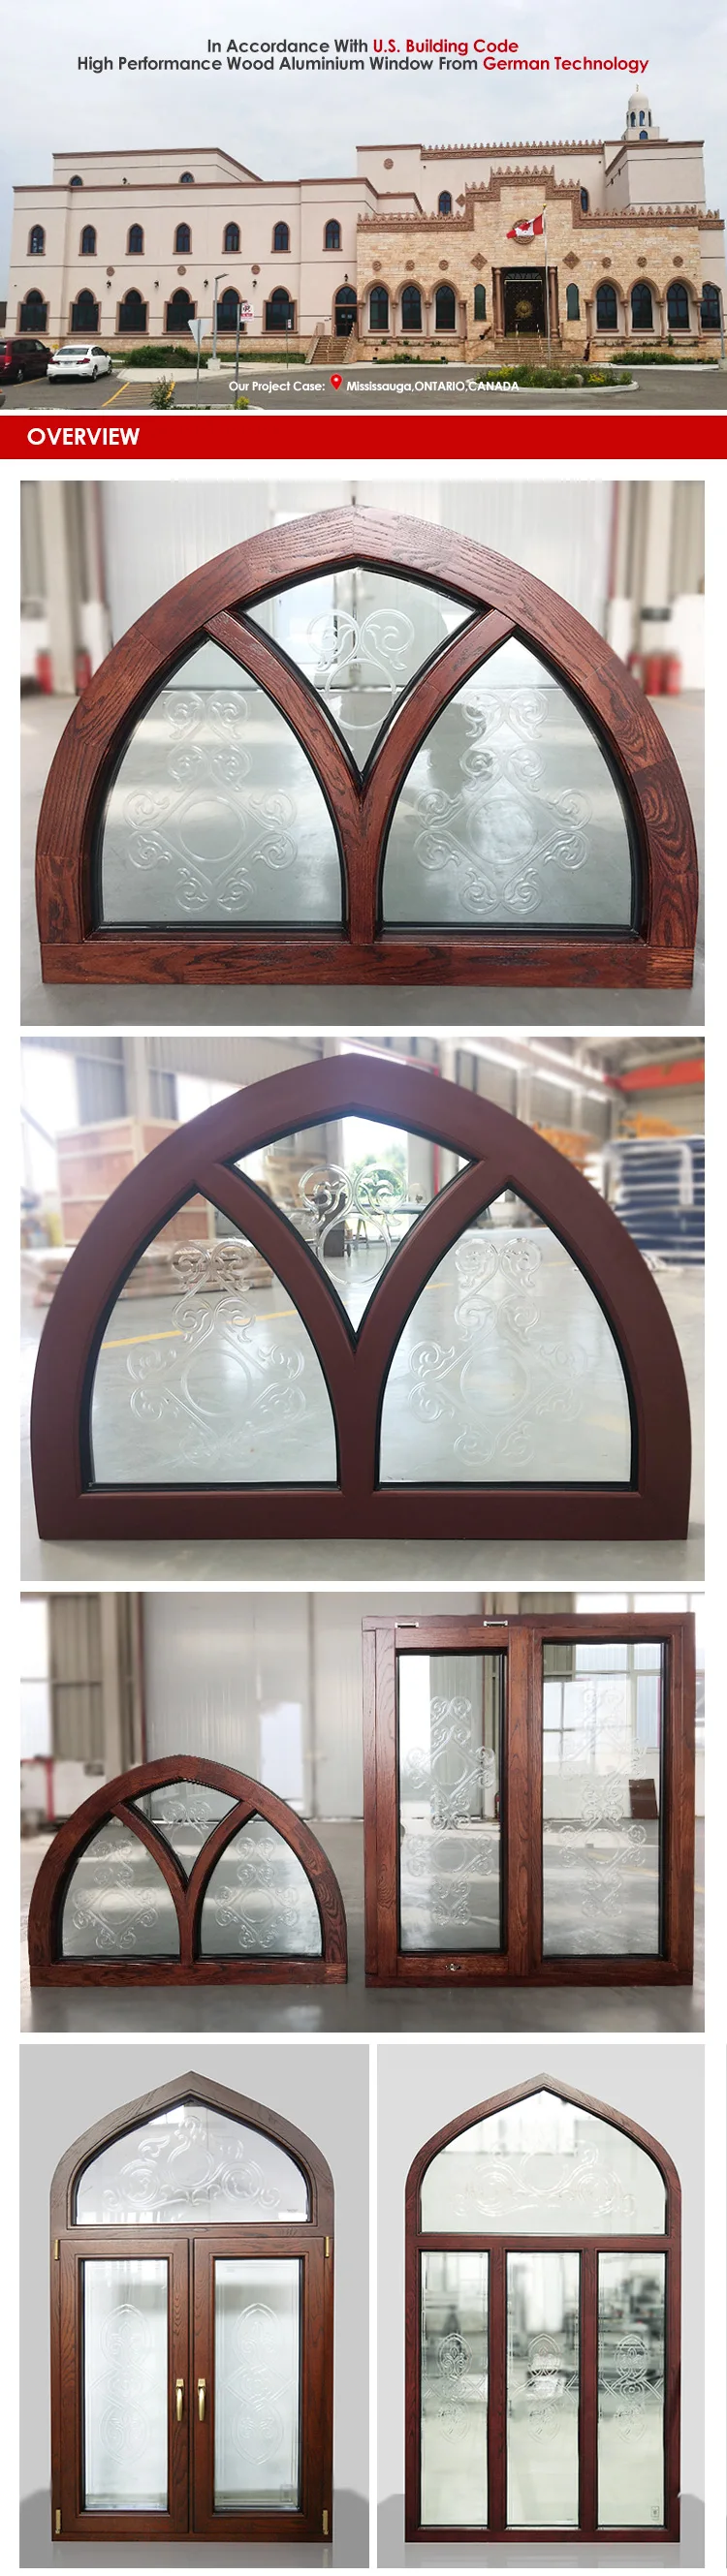 Factory Direct Sales vintage glass window panes treating wood frames traditional casement mosques window